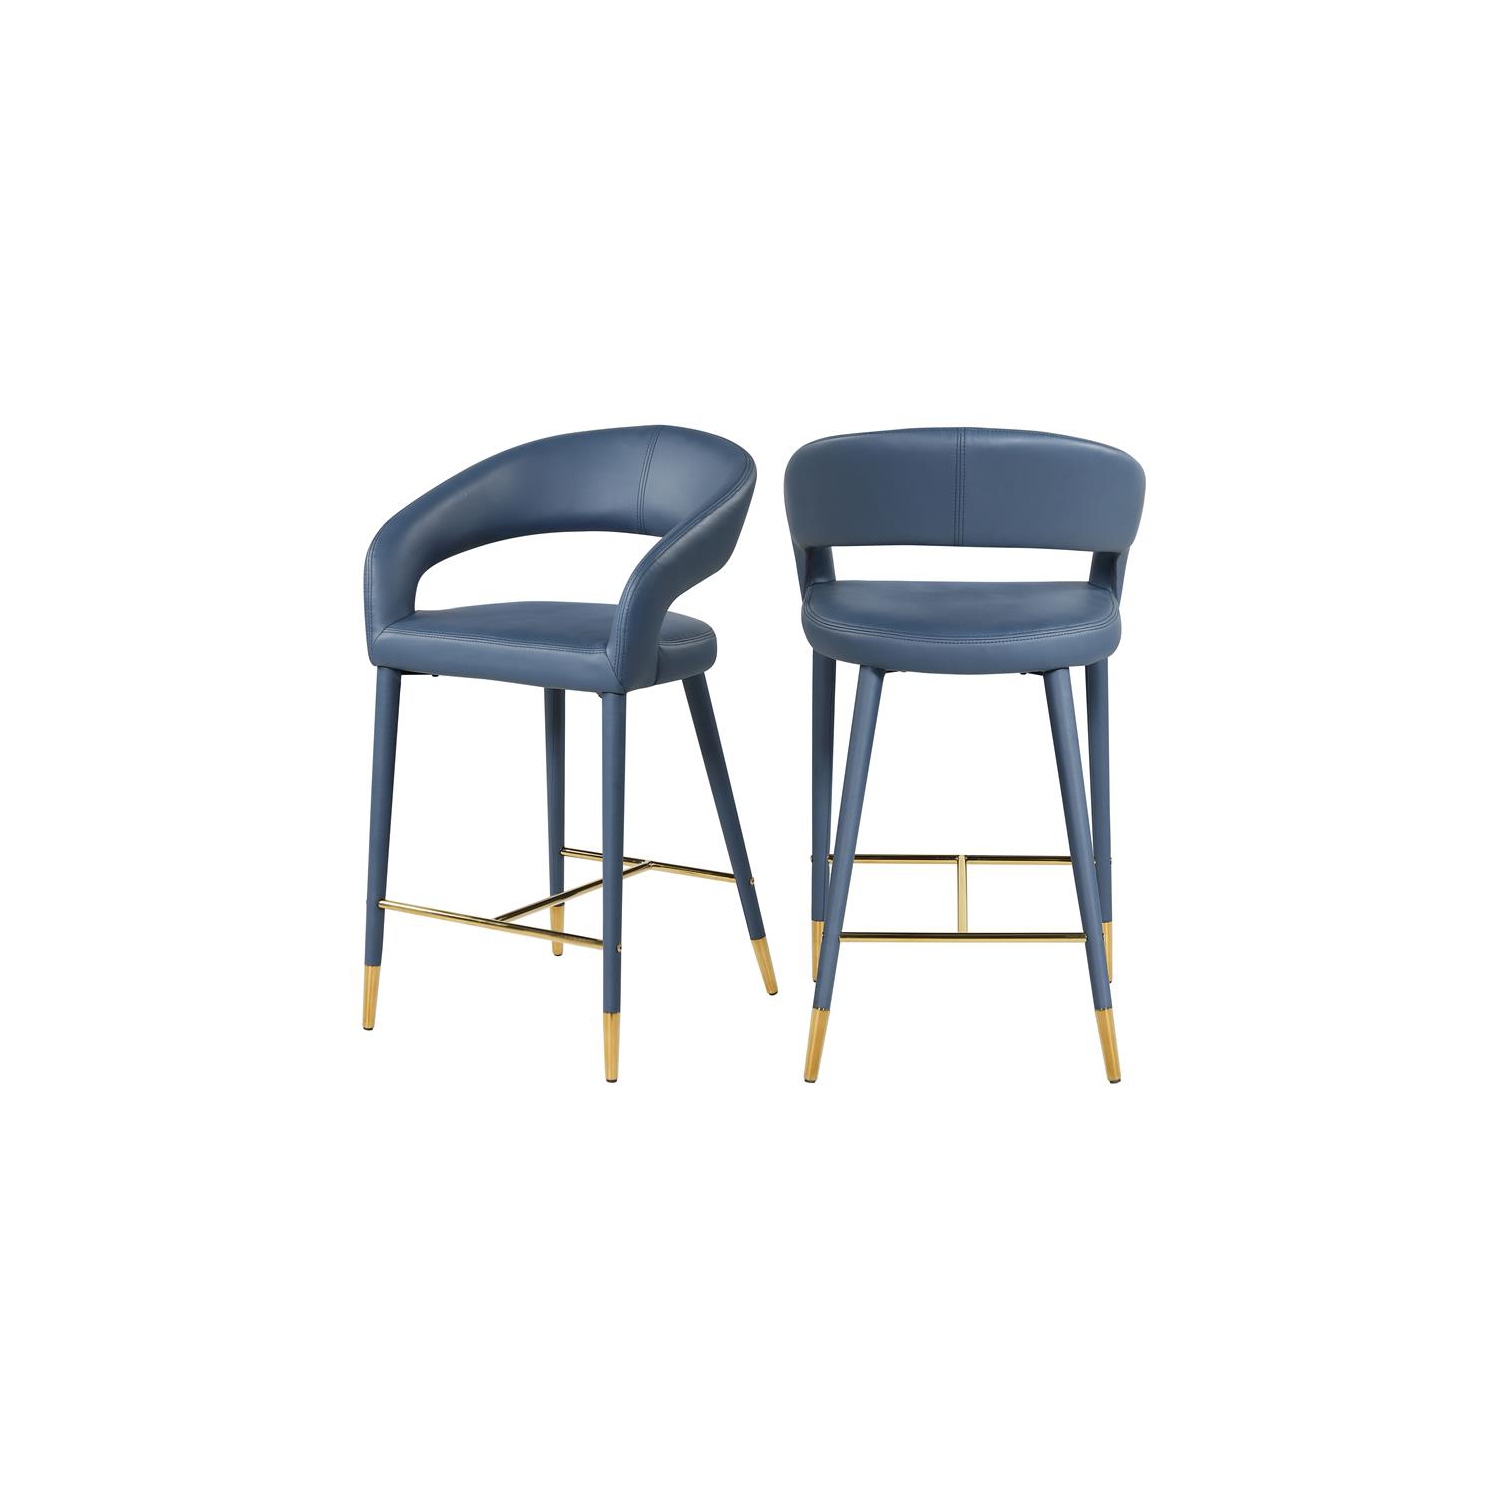 Meridian Furniture Destiny Navy Faux Leather Stool